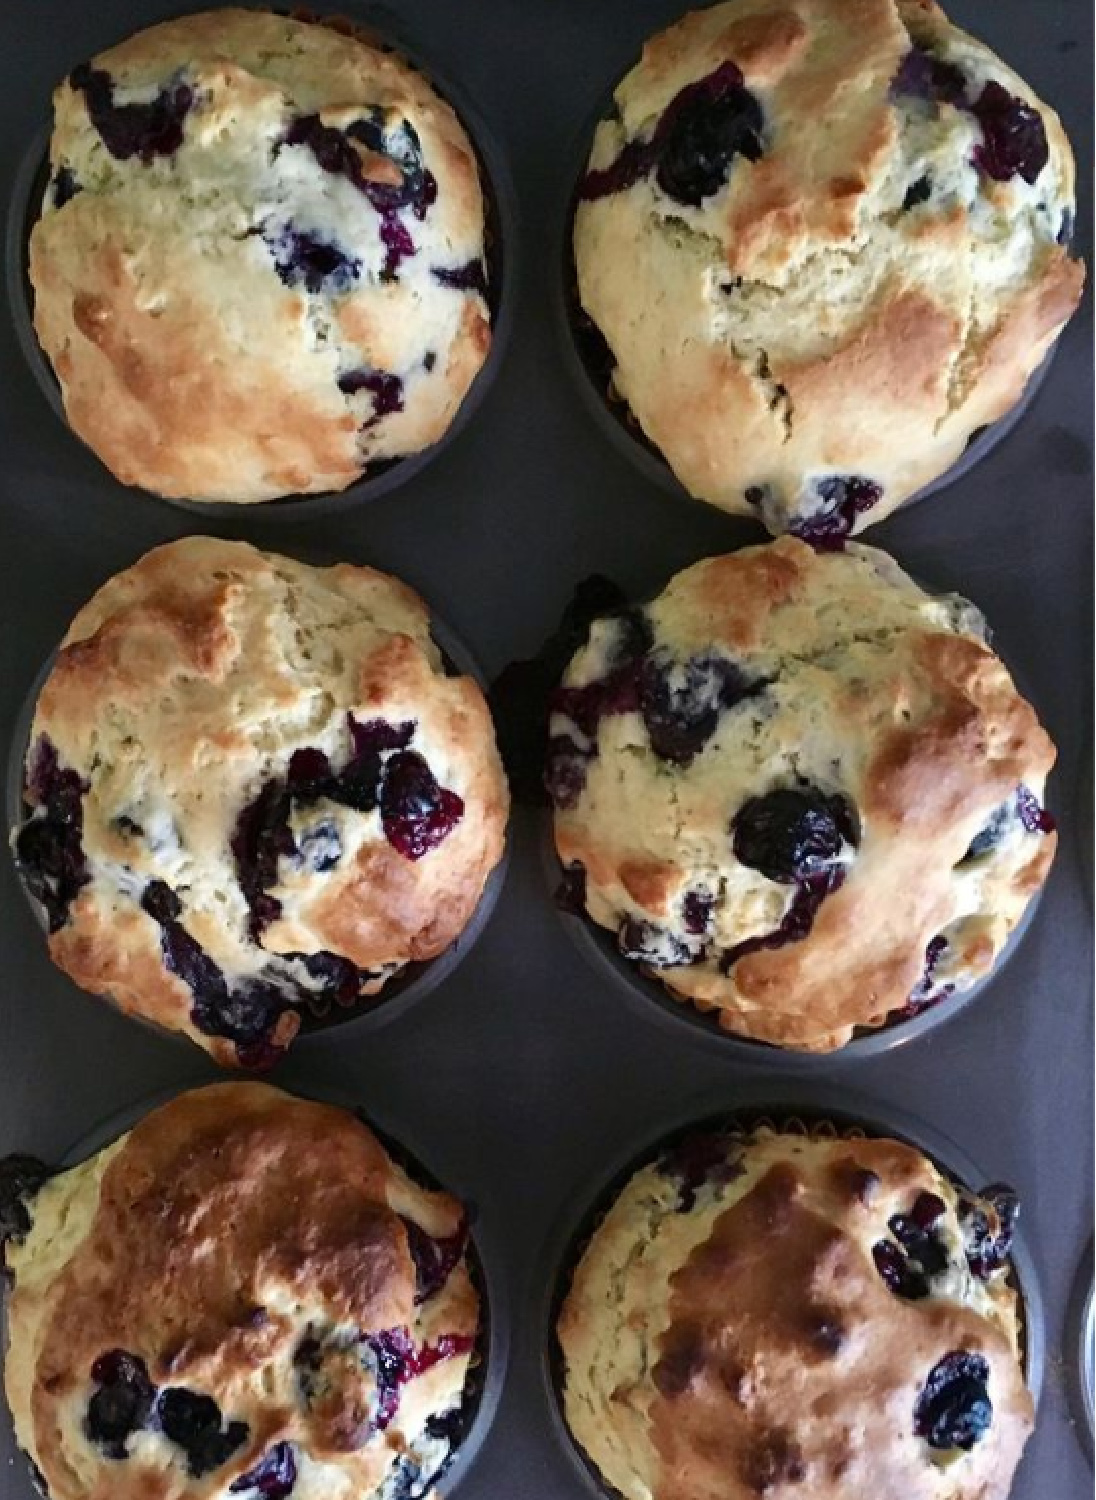 Blueberry muffins straight out of the oven - NoraMurphyCountryHouse. #blueberrymuffins